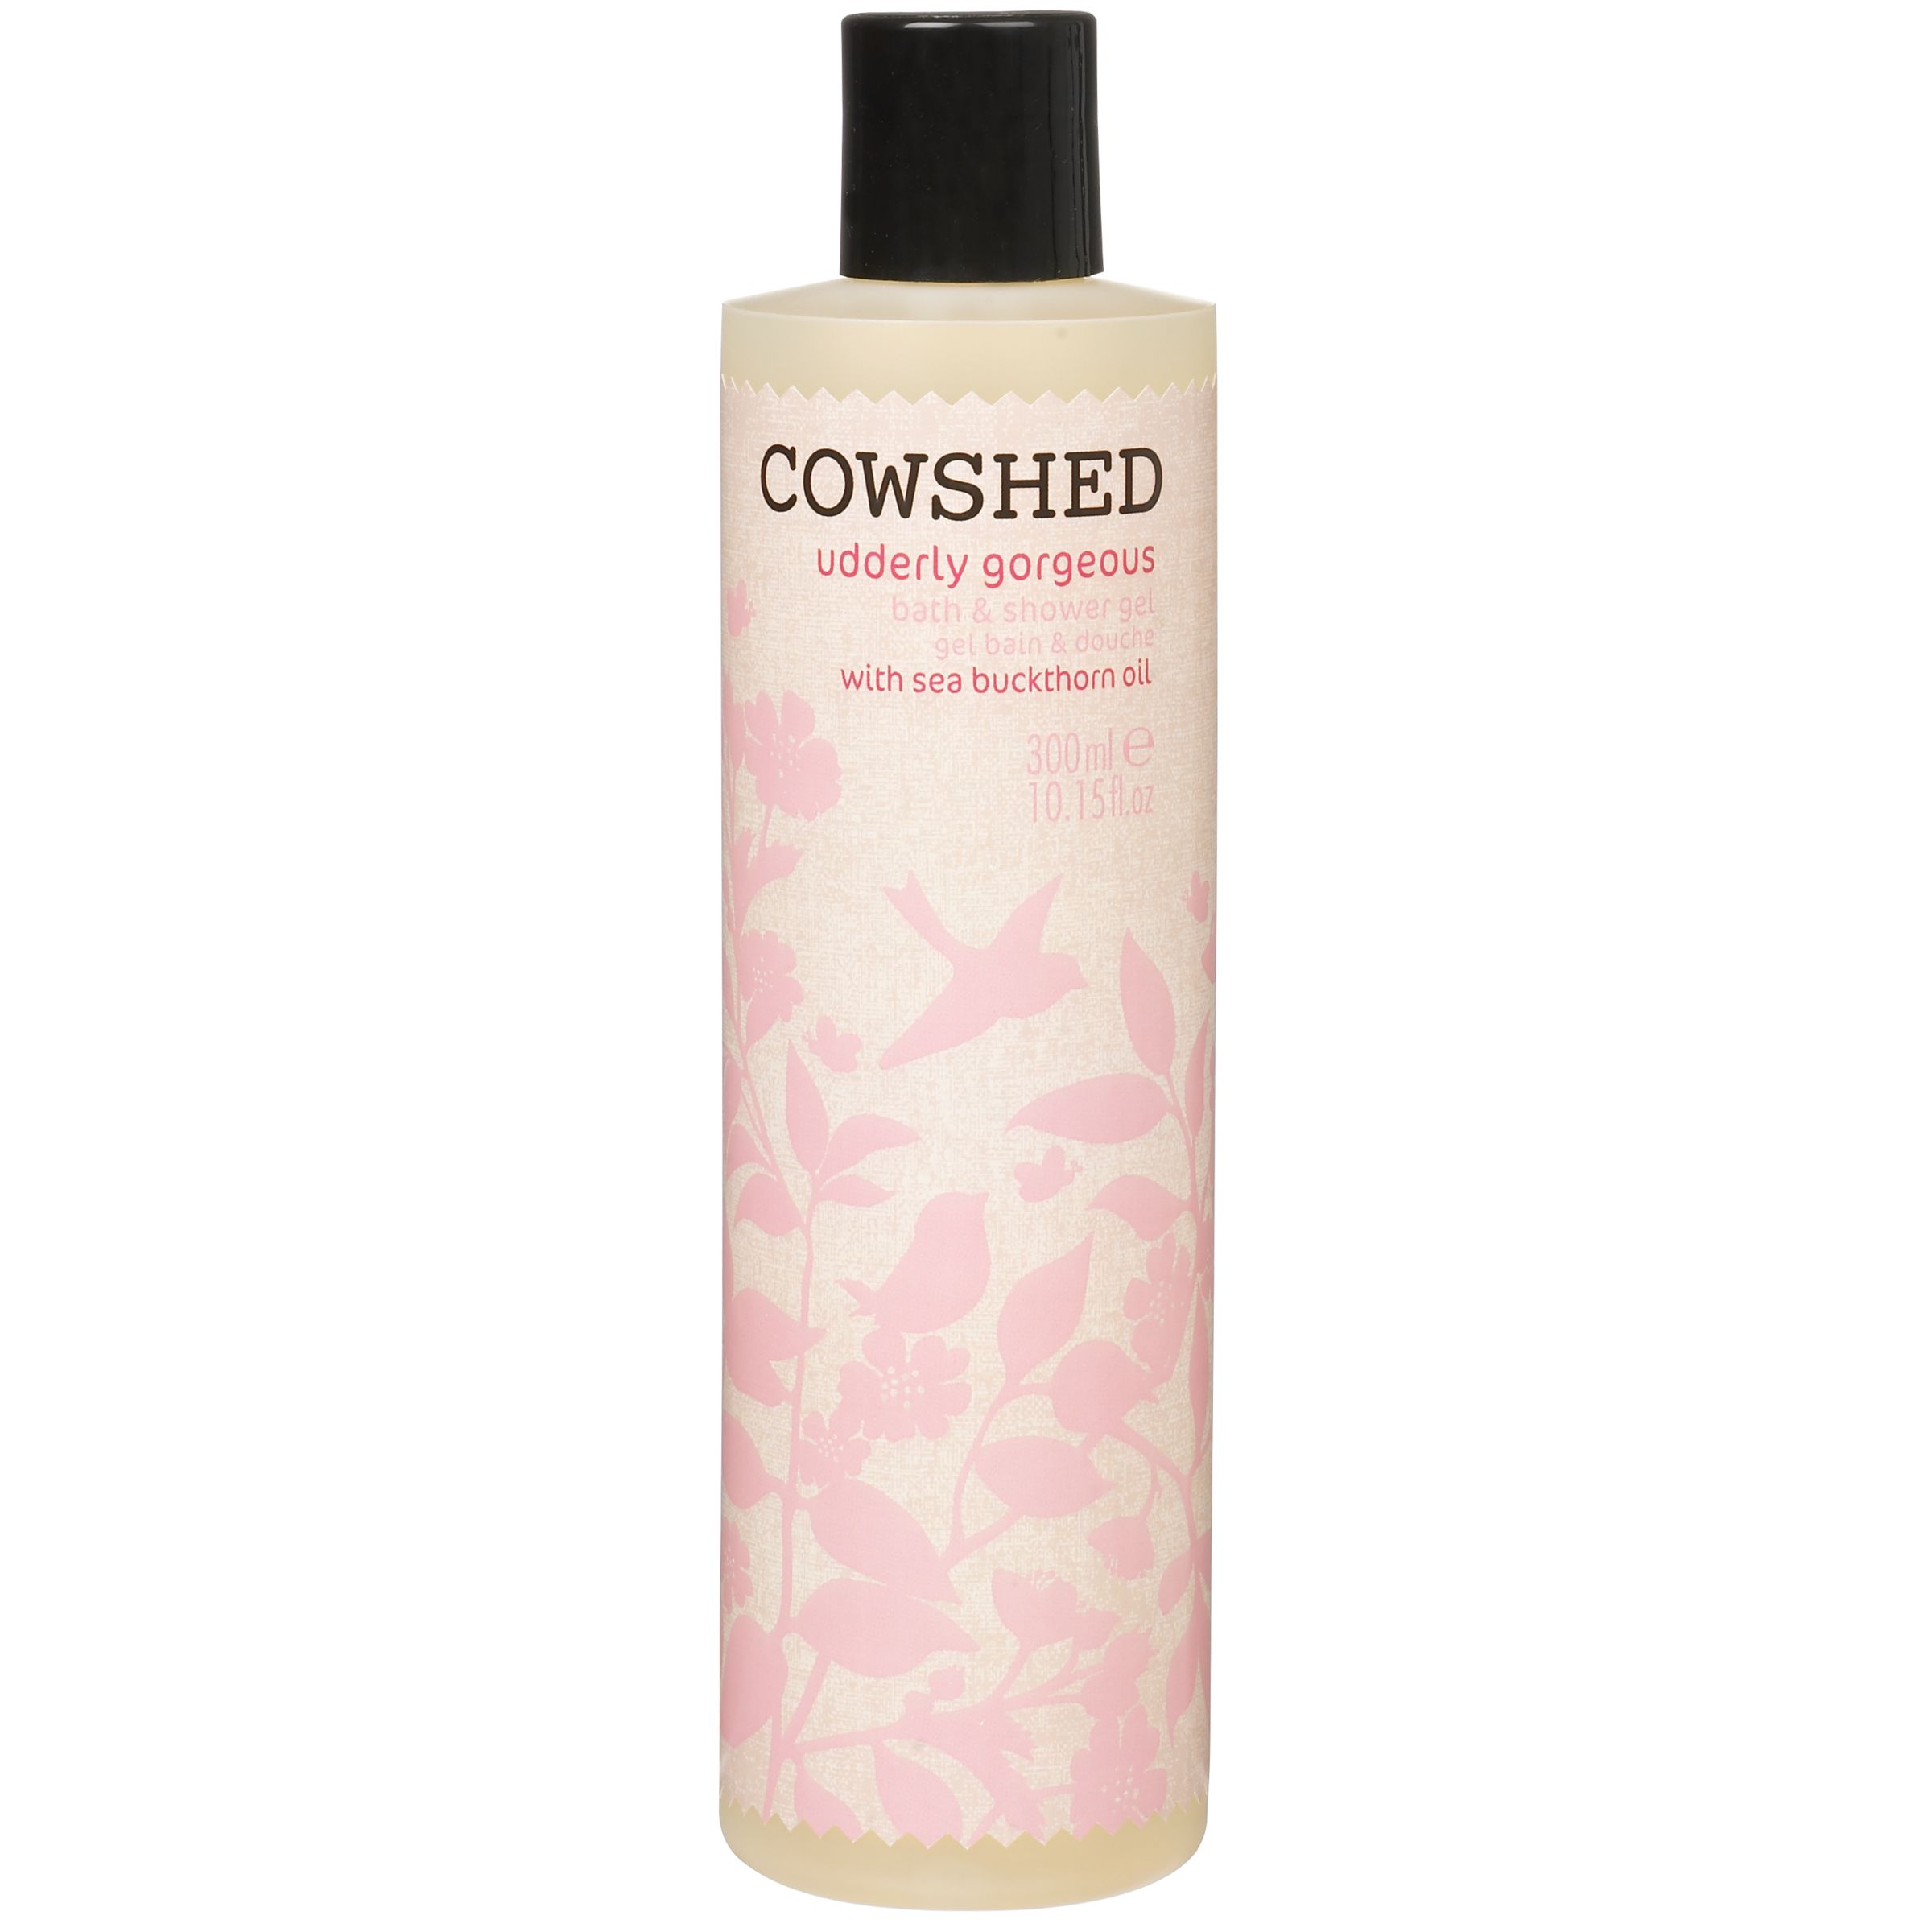 Cowshed Udderly Gorgeous Bath and Shower Gel,